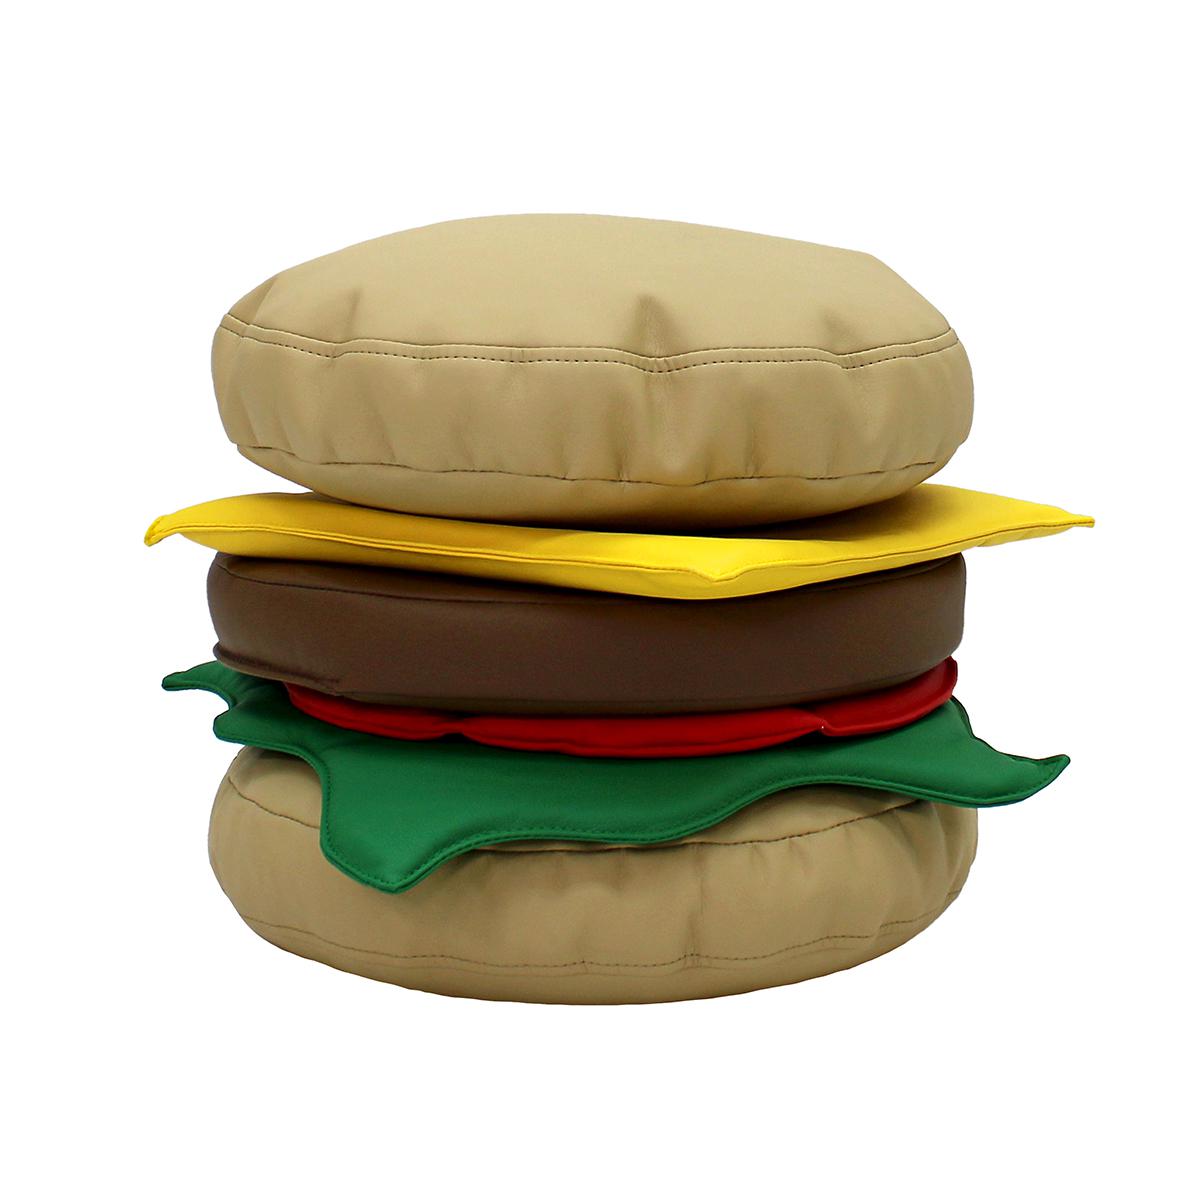  Softscape Stack-A-Burger Play Set 6-Piece 